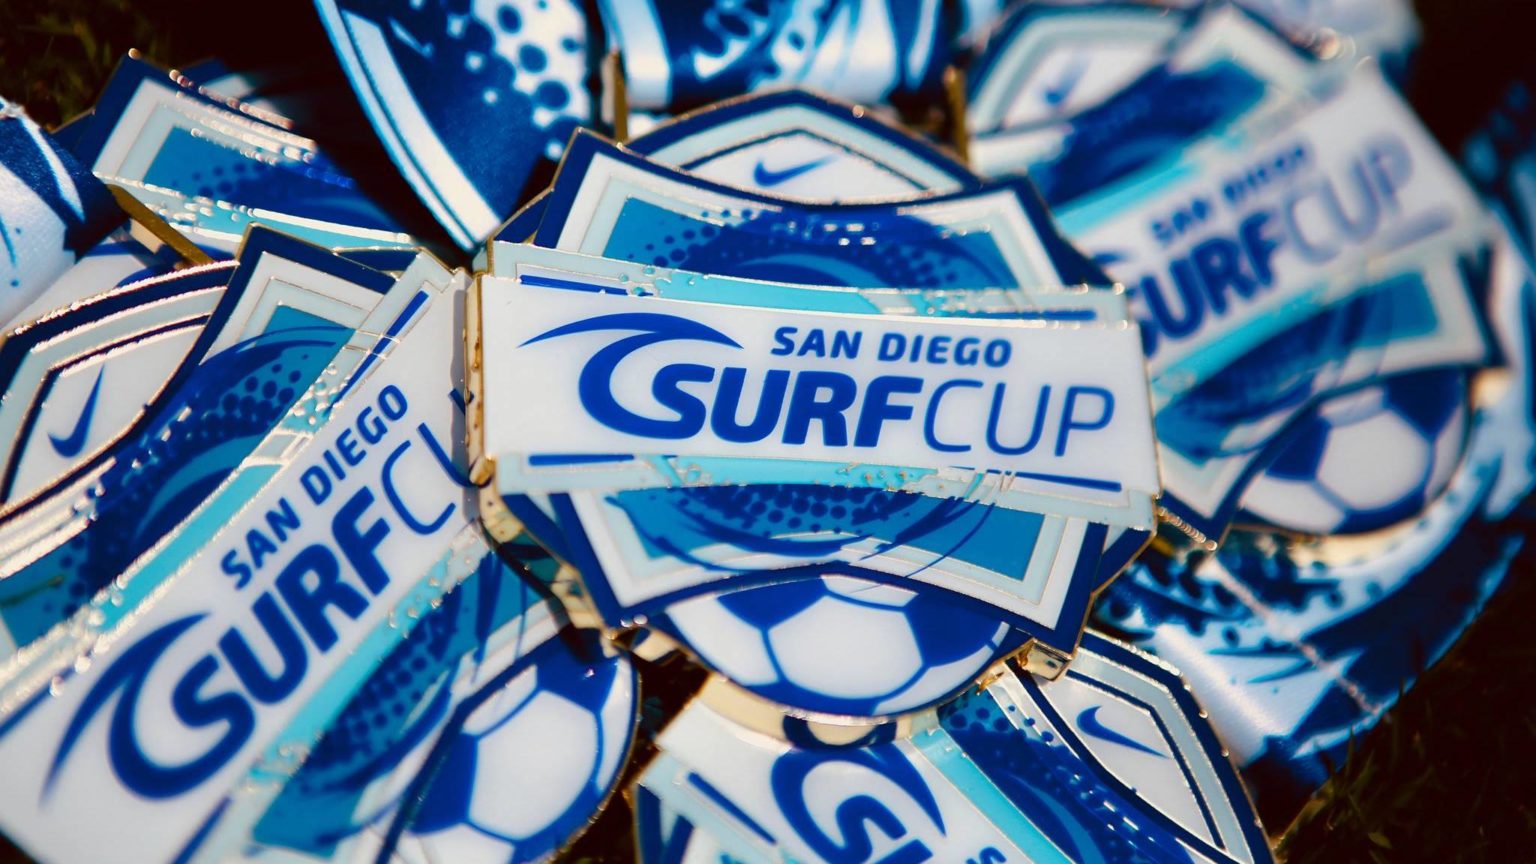 SURF CUP 2020 OLDERS WILL NOW BE HELD ON LABOR DAY • SoccerToday